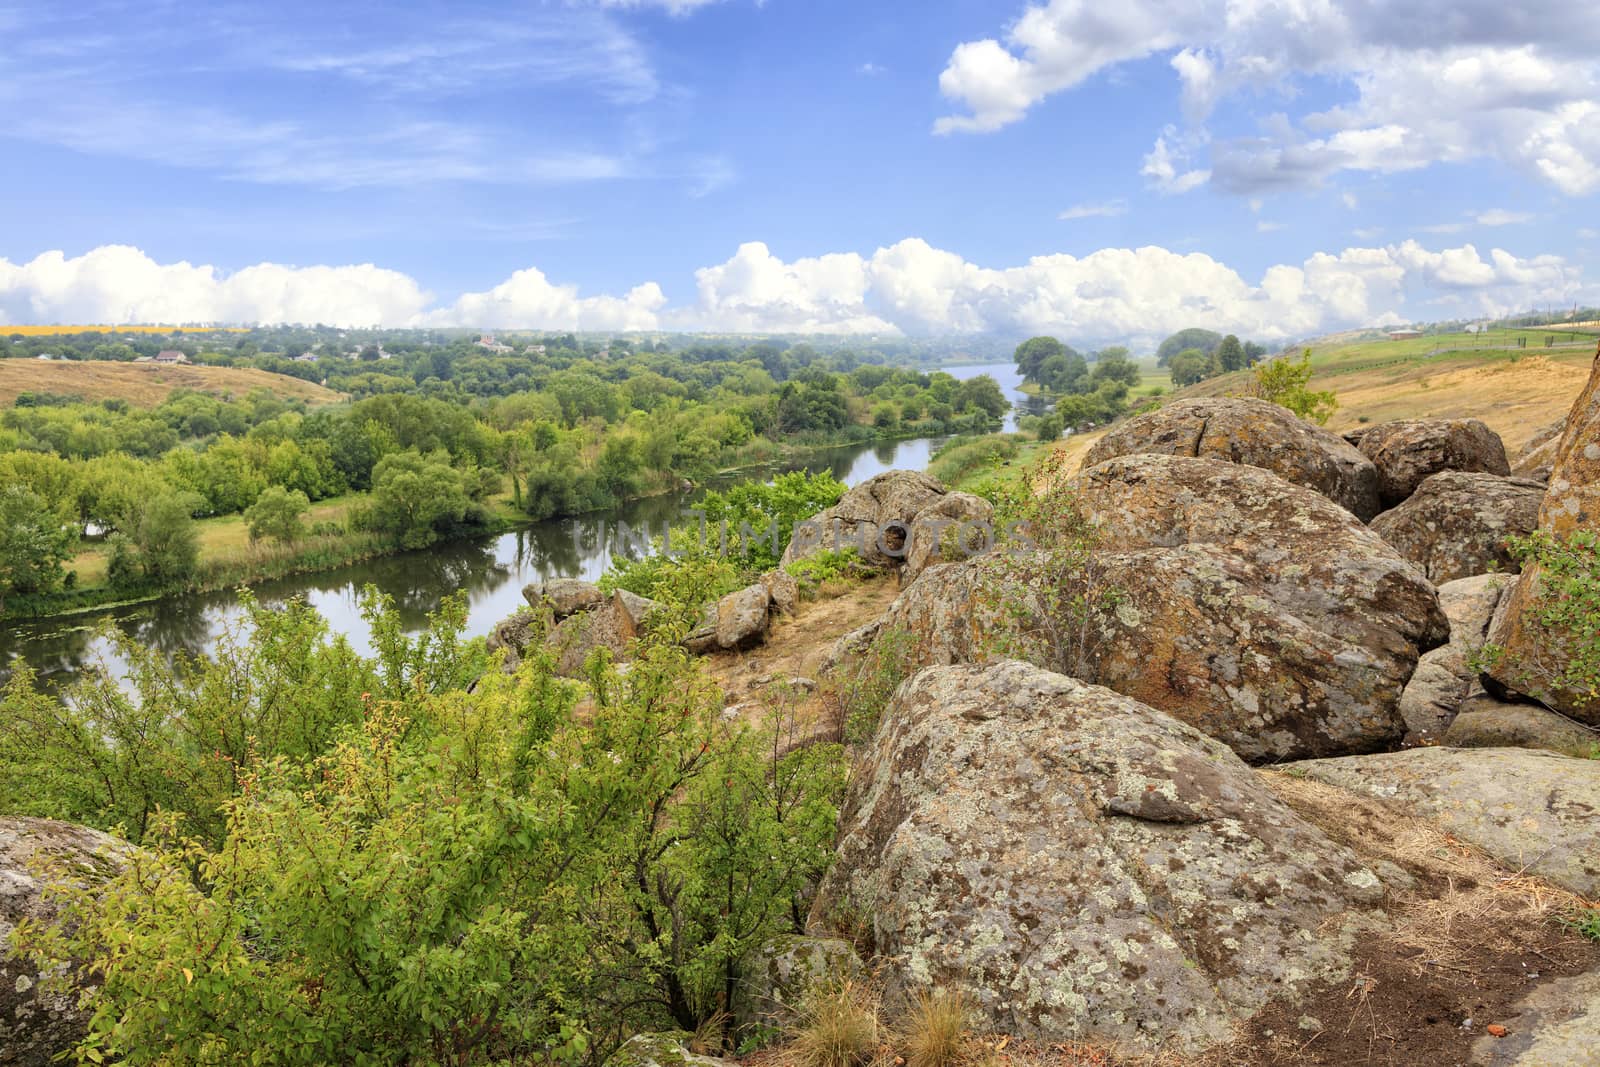 The Southern Bug River in the summer is rocky shores, bright green vegetation and a cloudy blue sky.